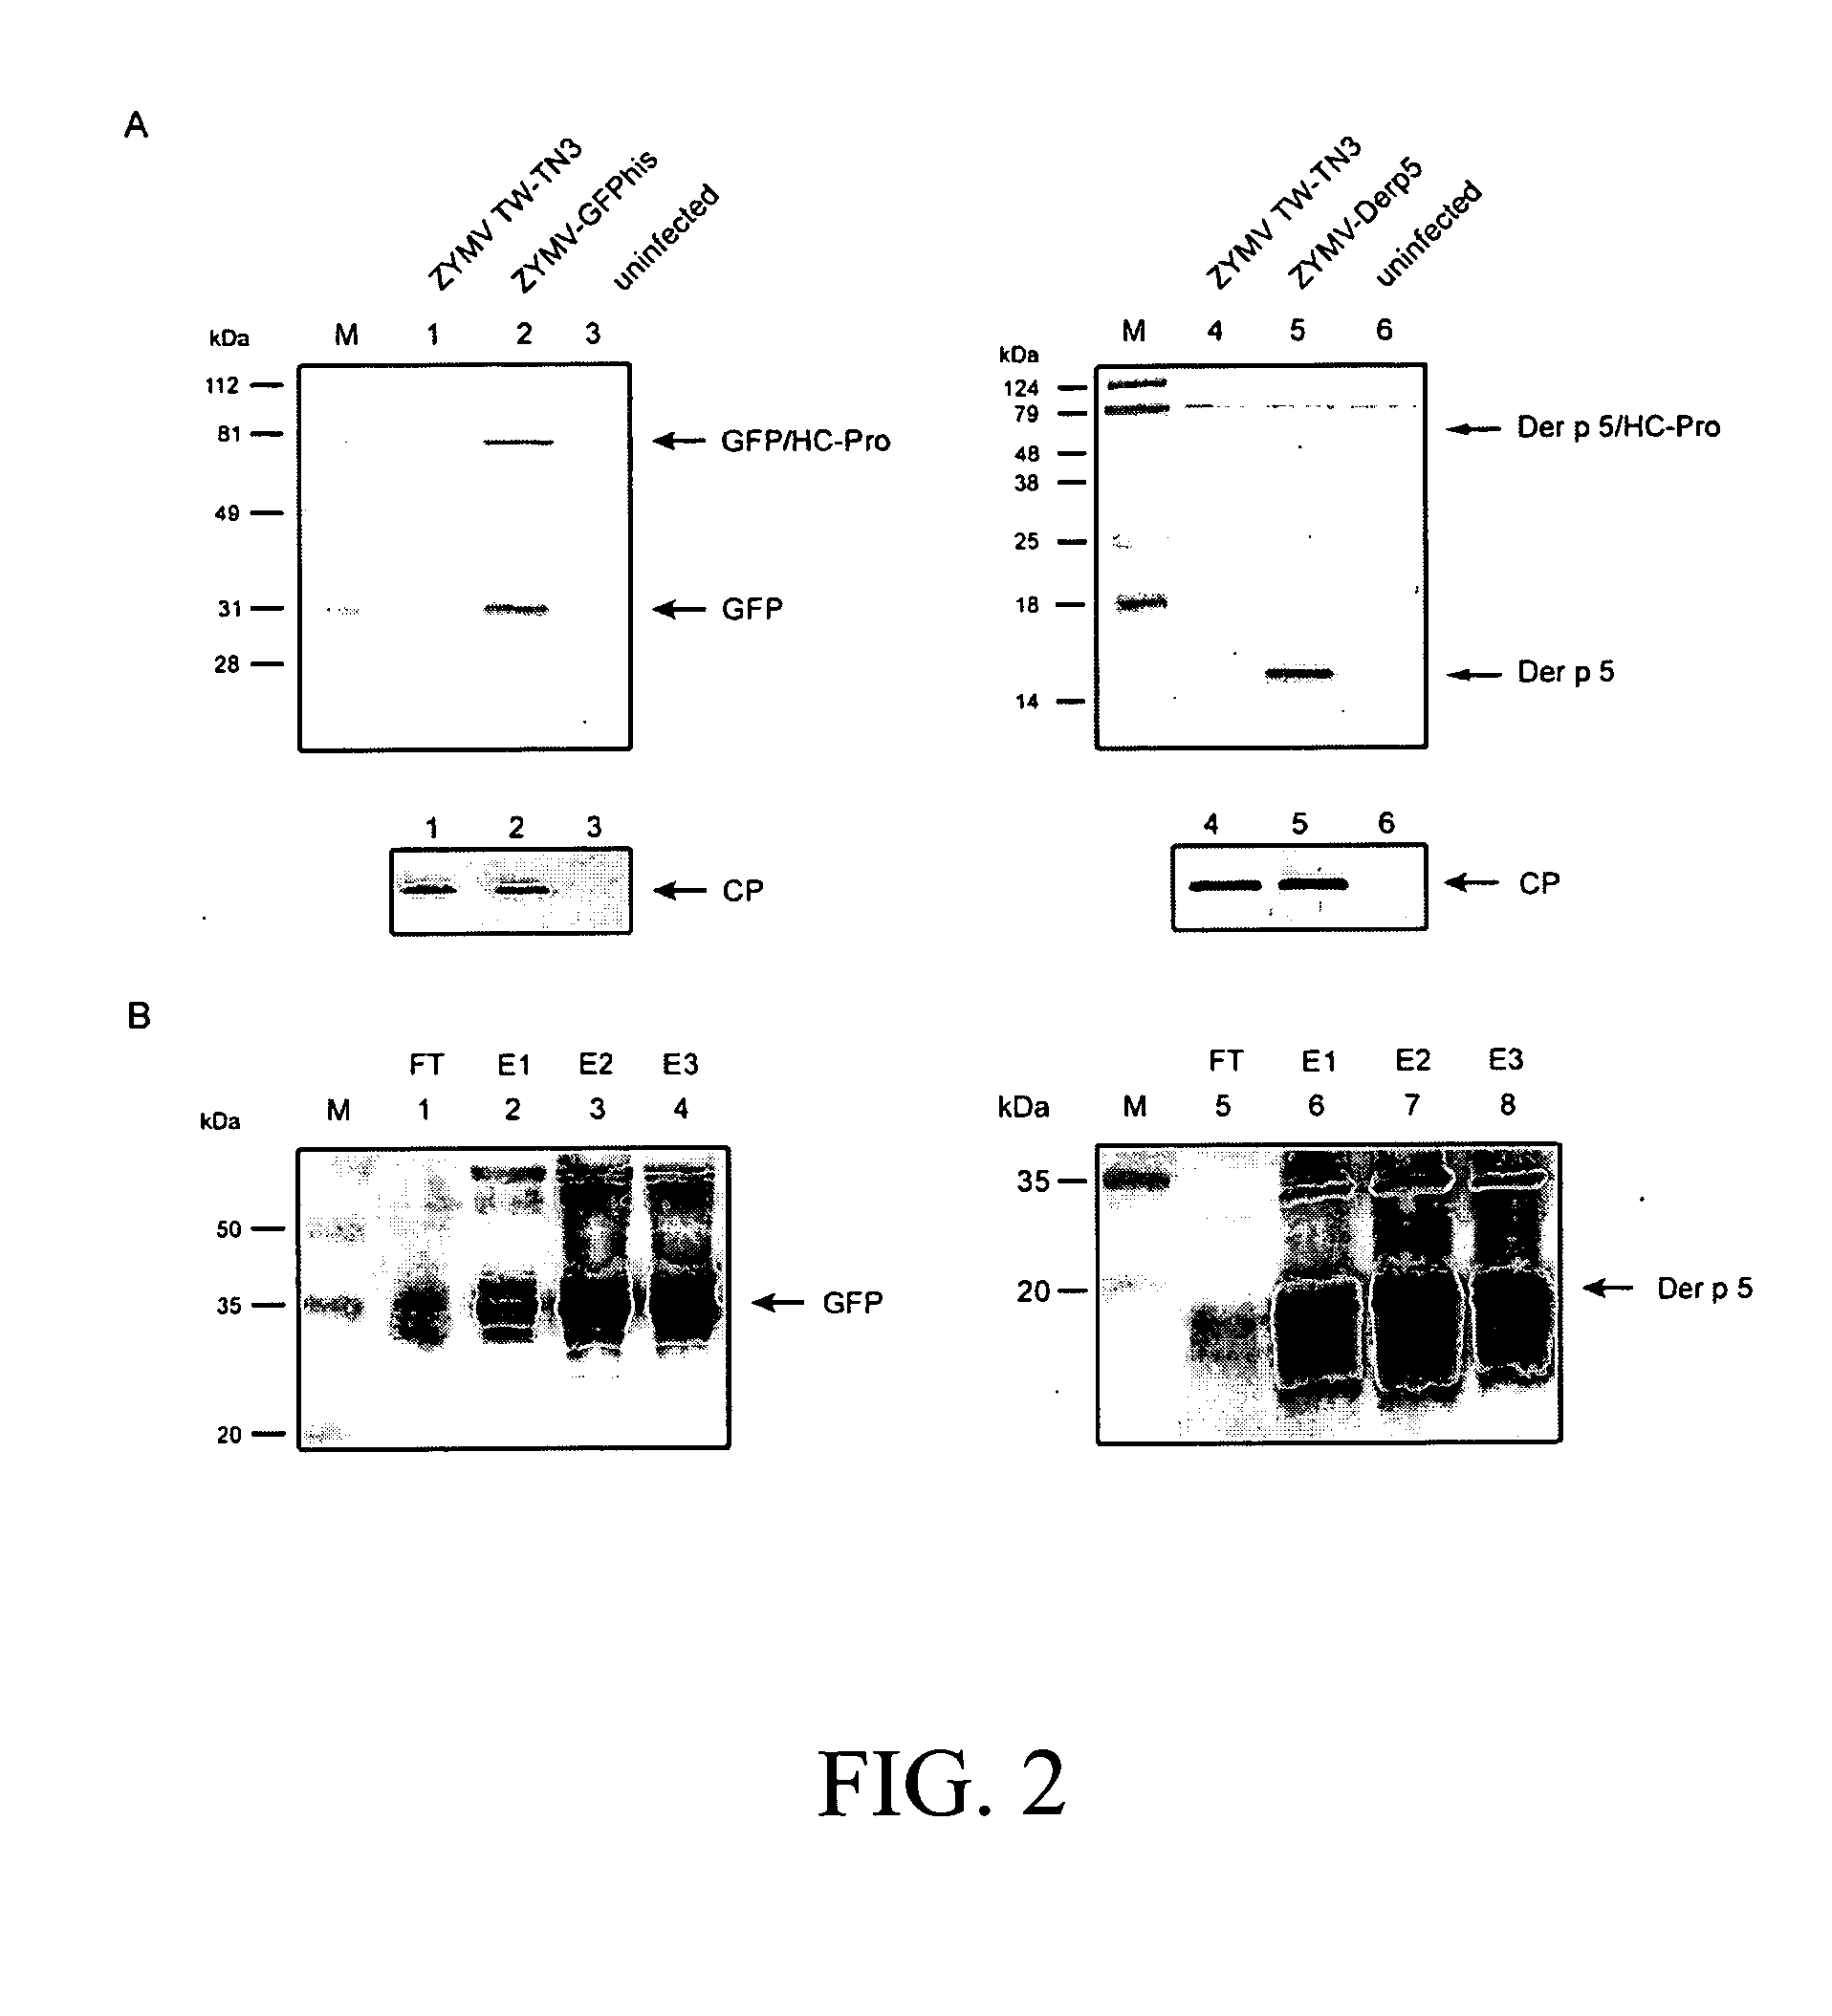 Process for producing dust mite allergen